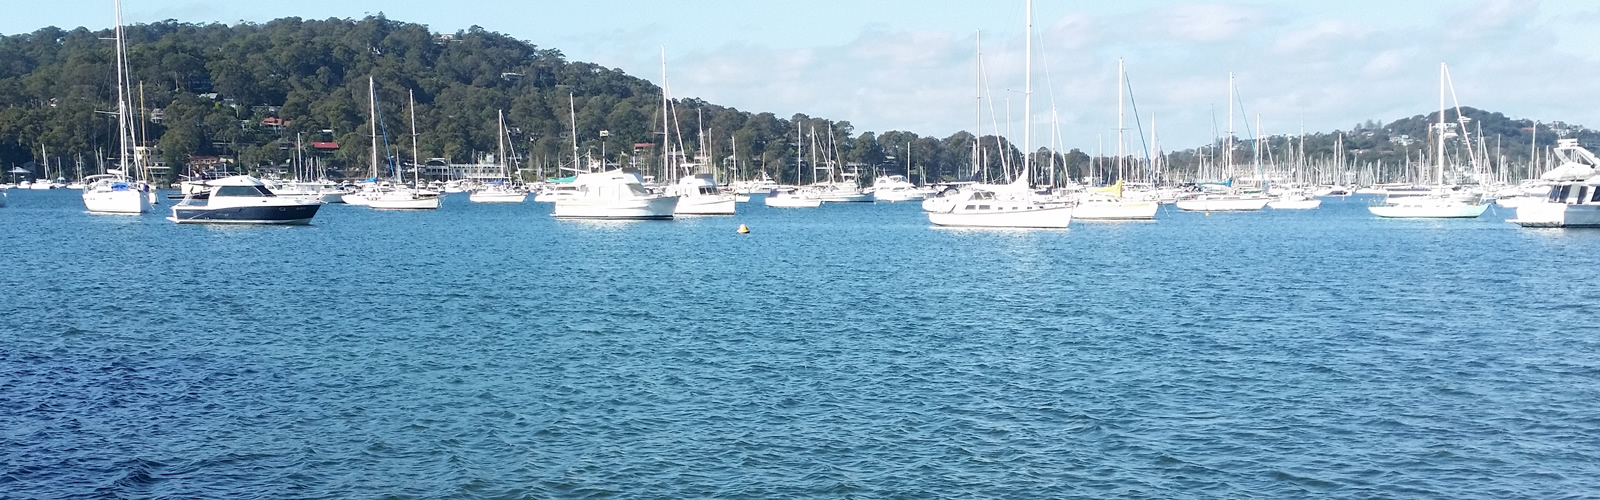 Pittwater boats